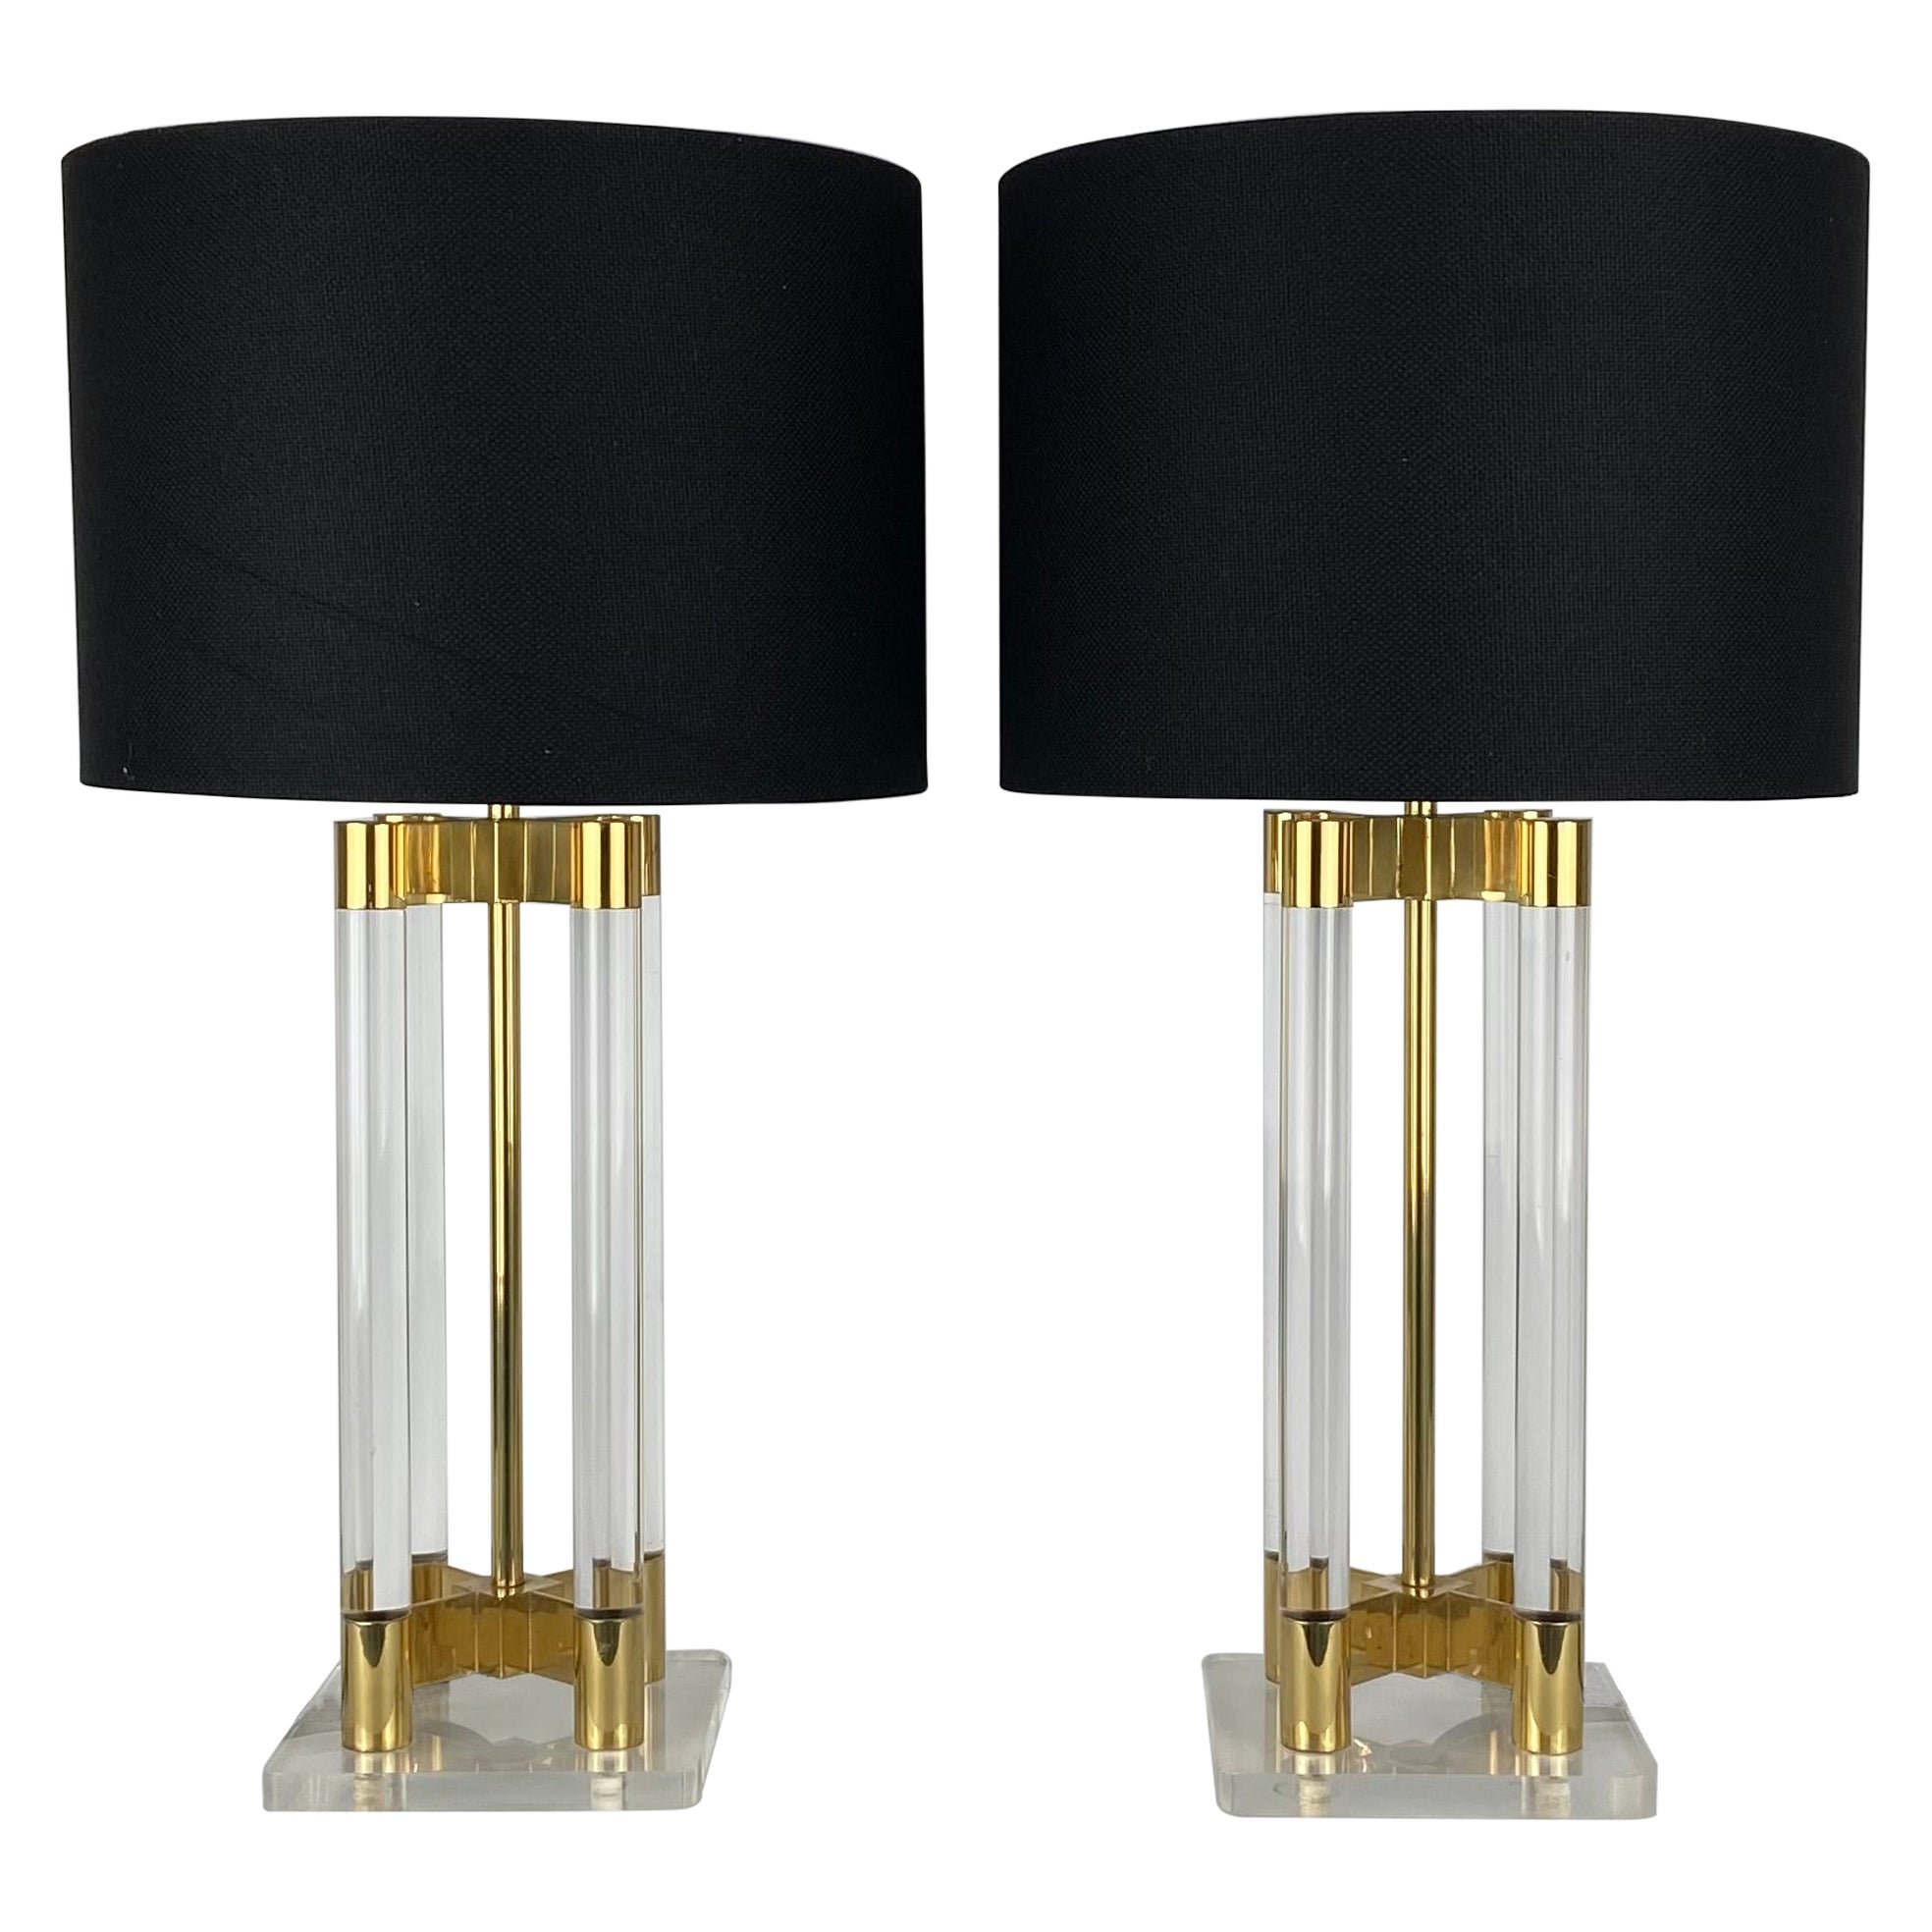 Pair of lucite table lamps